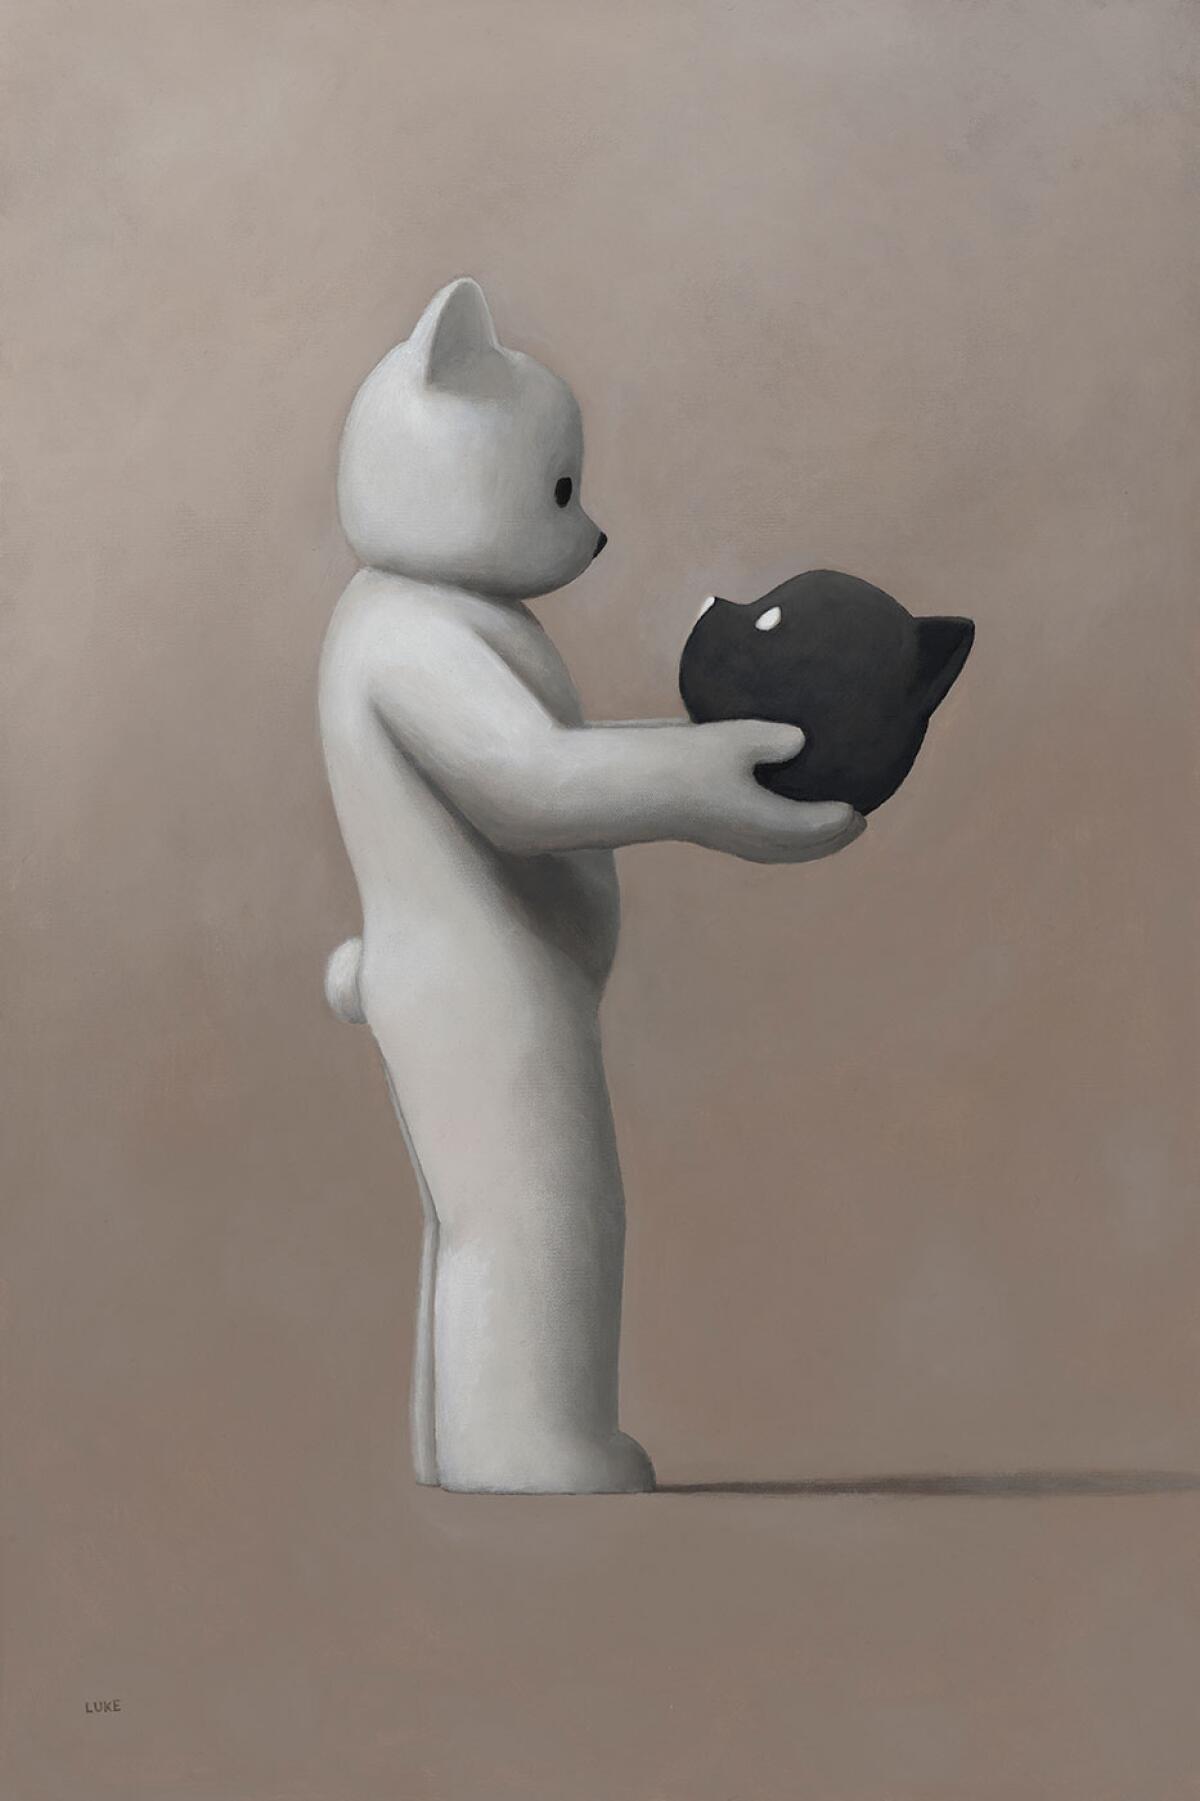 A painting of a white cartoon cat holding a black cat's head